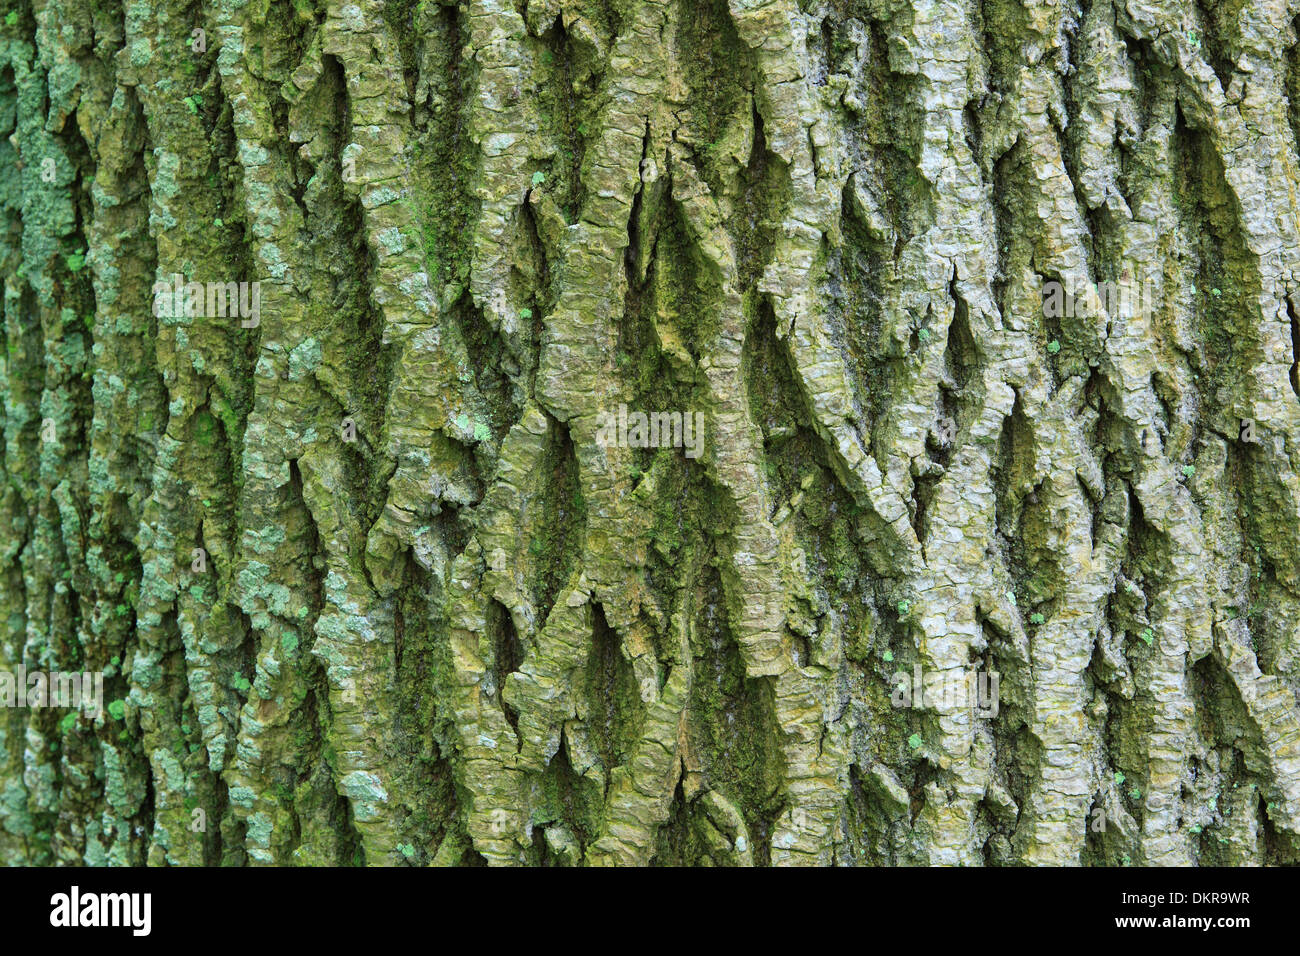 Maple Tree Bark Trunk Detail Background Macro Close Up Bark Switzerland Sihlwald Structure Wood Forest Canton Zurich Concepts Stock Photo Alamy